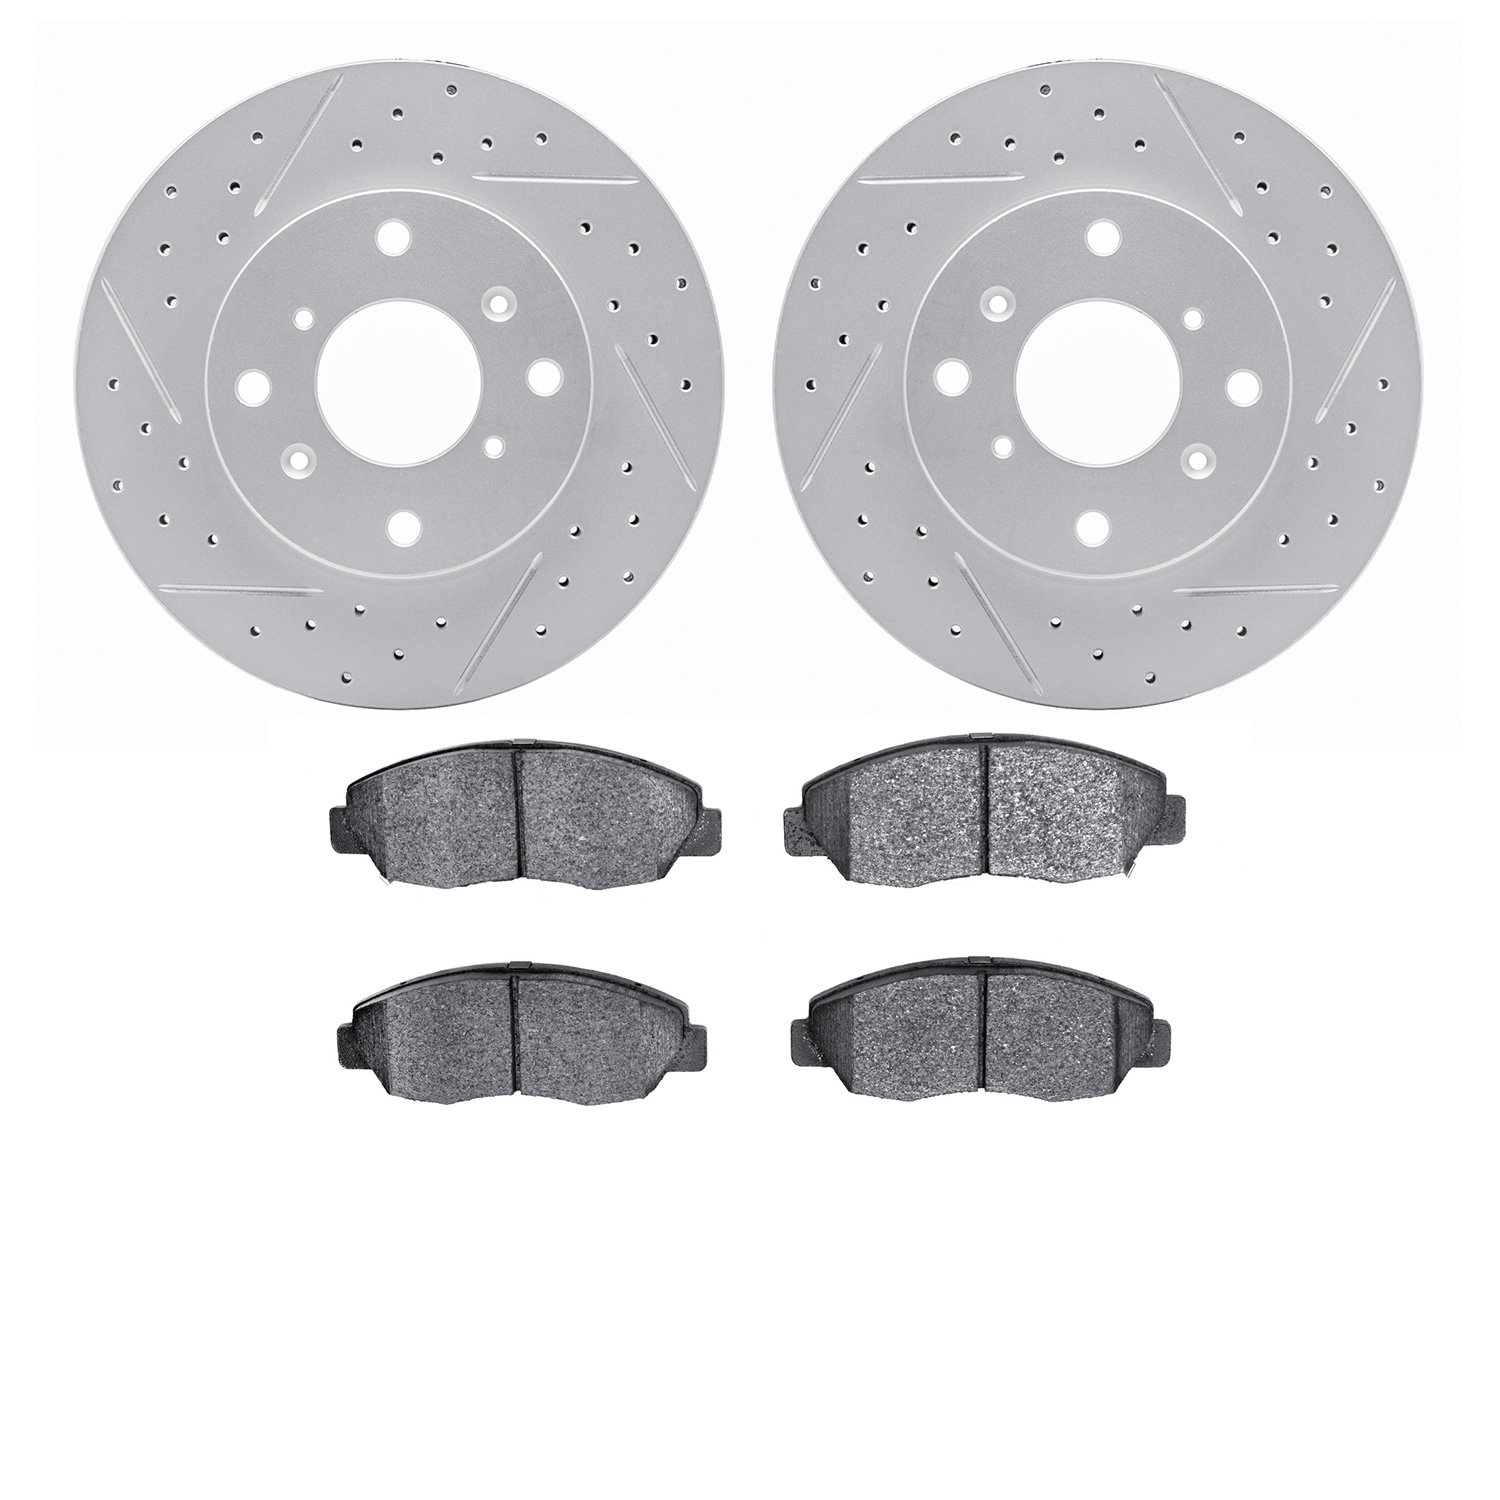 2502-59019 Geoperformance Drilled/Slotted Rotors w/5000 Advanced Brake Pads Kit, 1998-2002 Acura/Honda, Position: Front